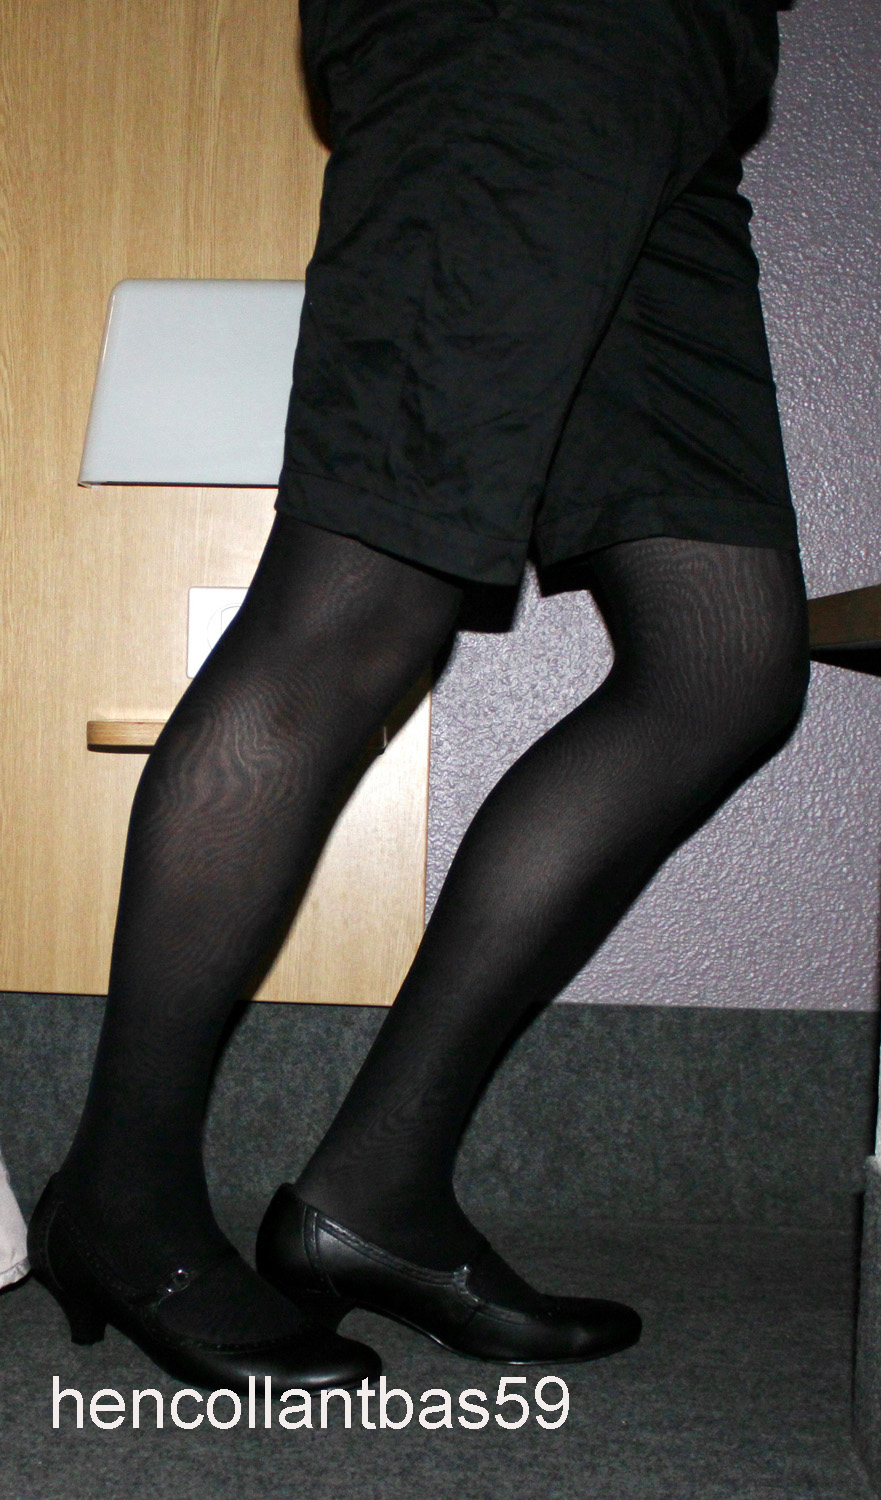 seamless pantyhose for men: First contribution from hencollantbas59 ...